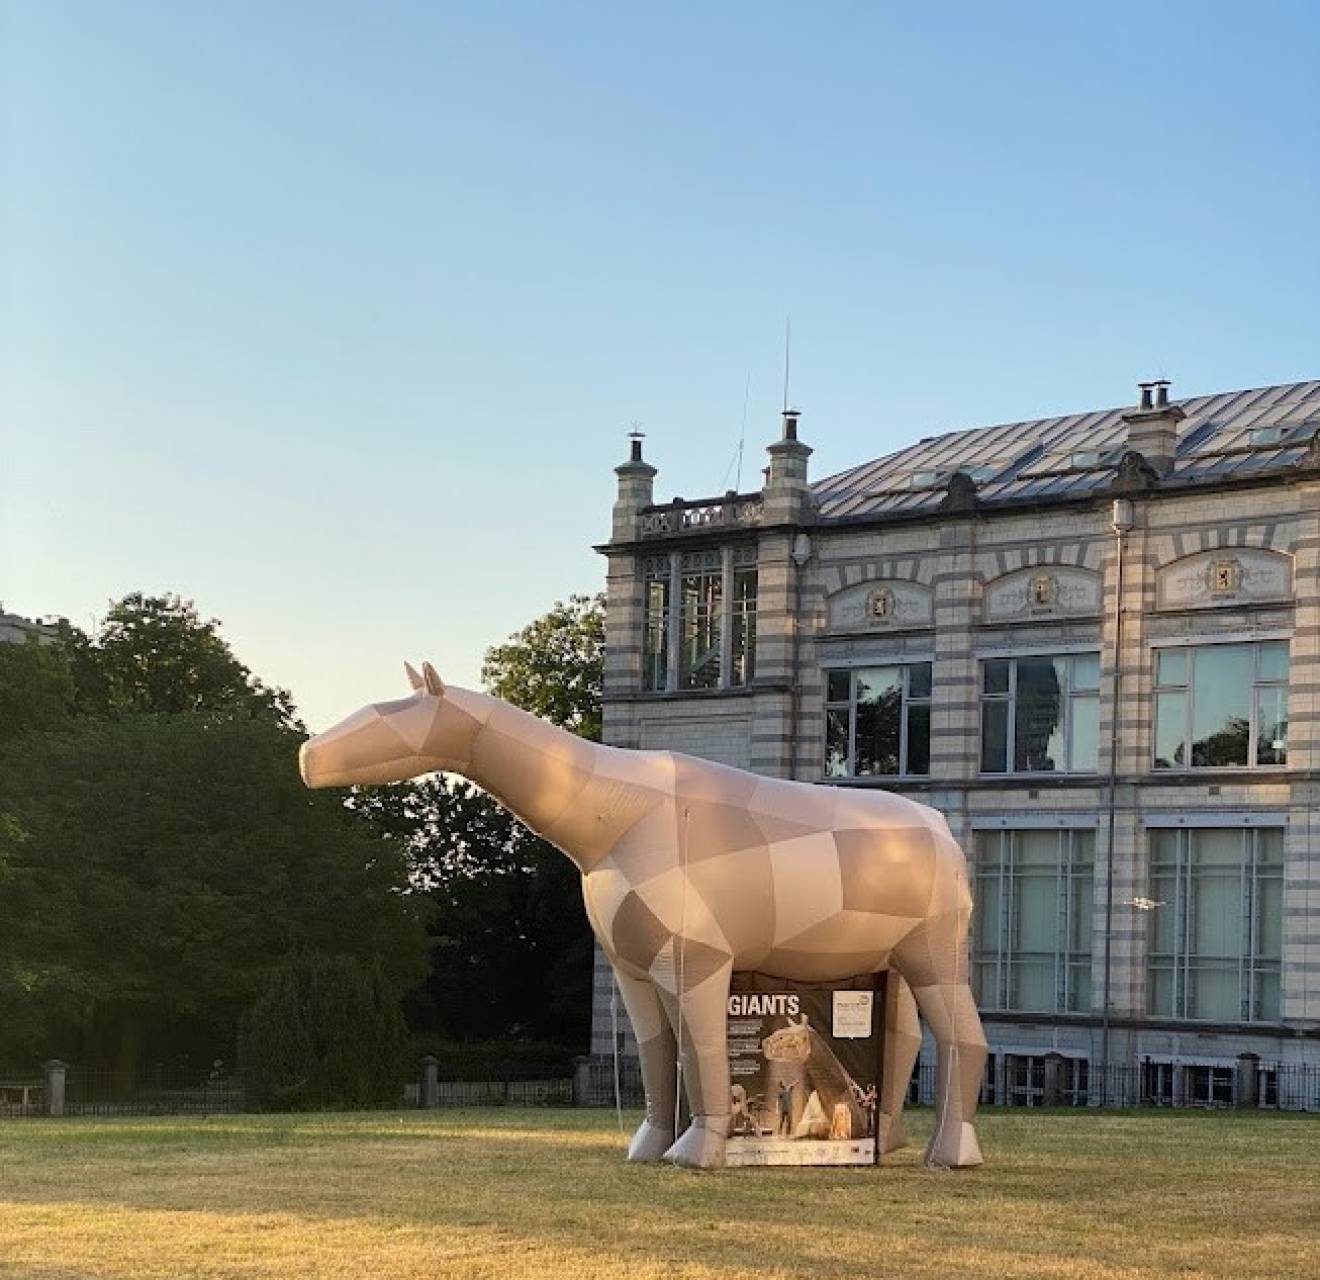 Big inflatable animals inflatable paraceratherium of 5 m high especially produced for the Royal Belgian Institute of Natural Sciences in Brussels as an eye-catcher for their new dinosaur exhibition X-Treme Creations